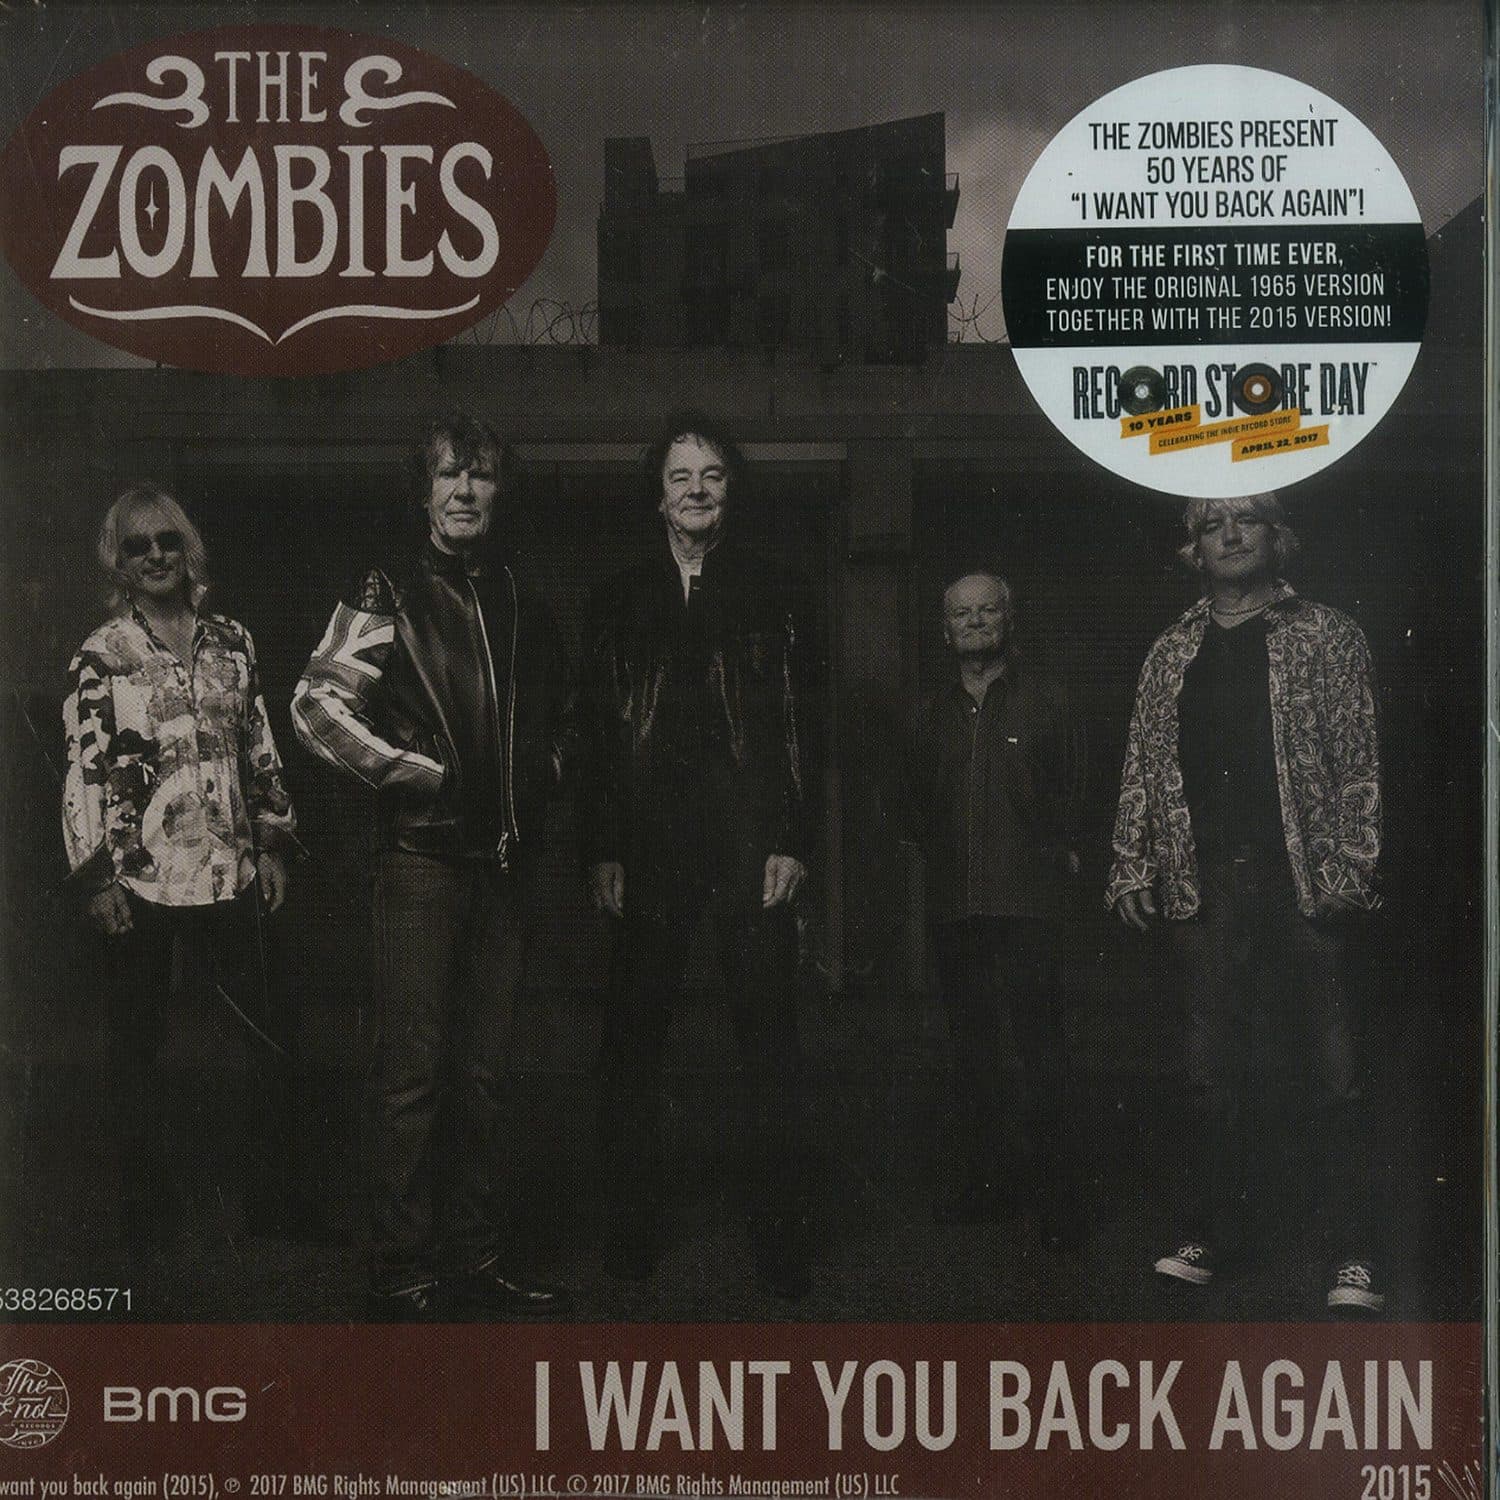 The Zombies - I WANT YOU BACK AGAIN 